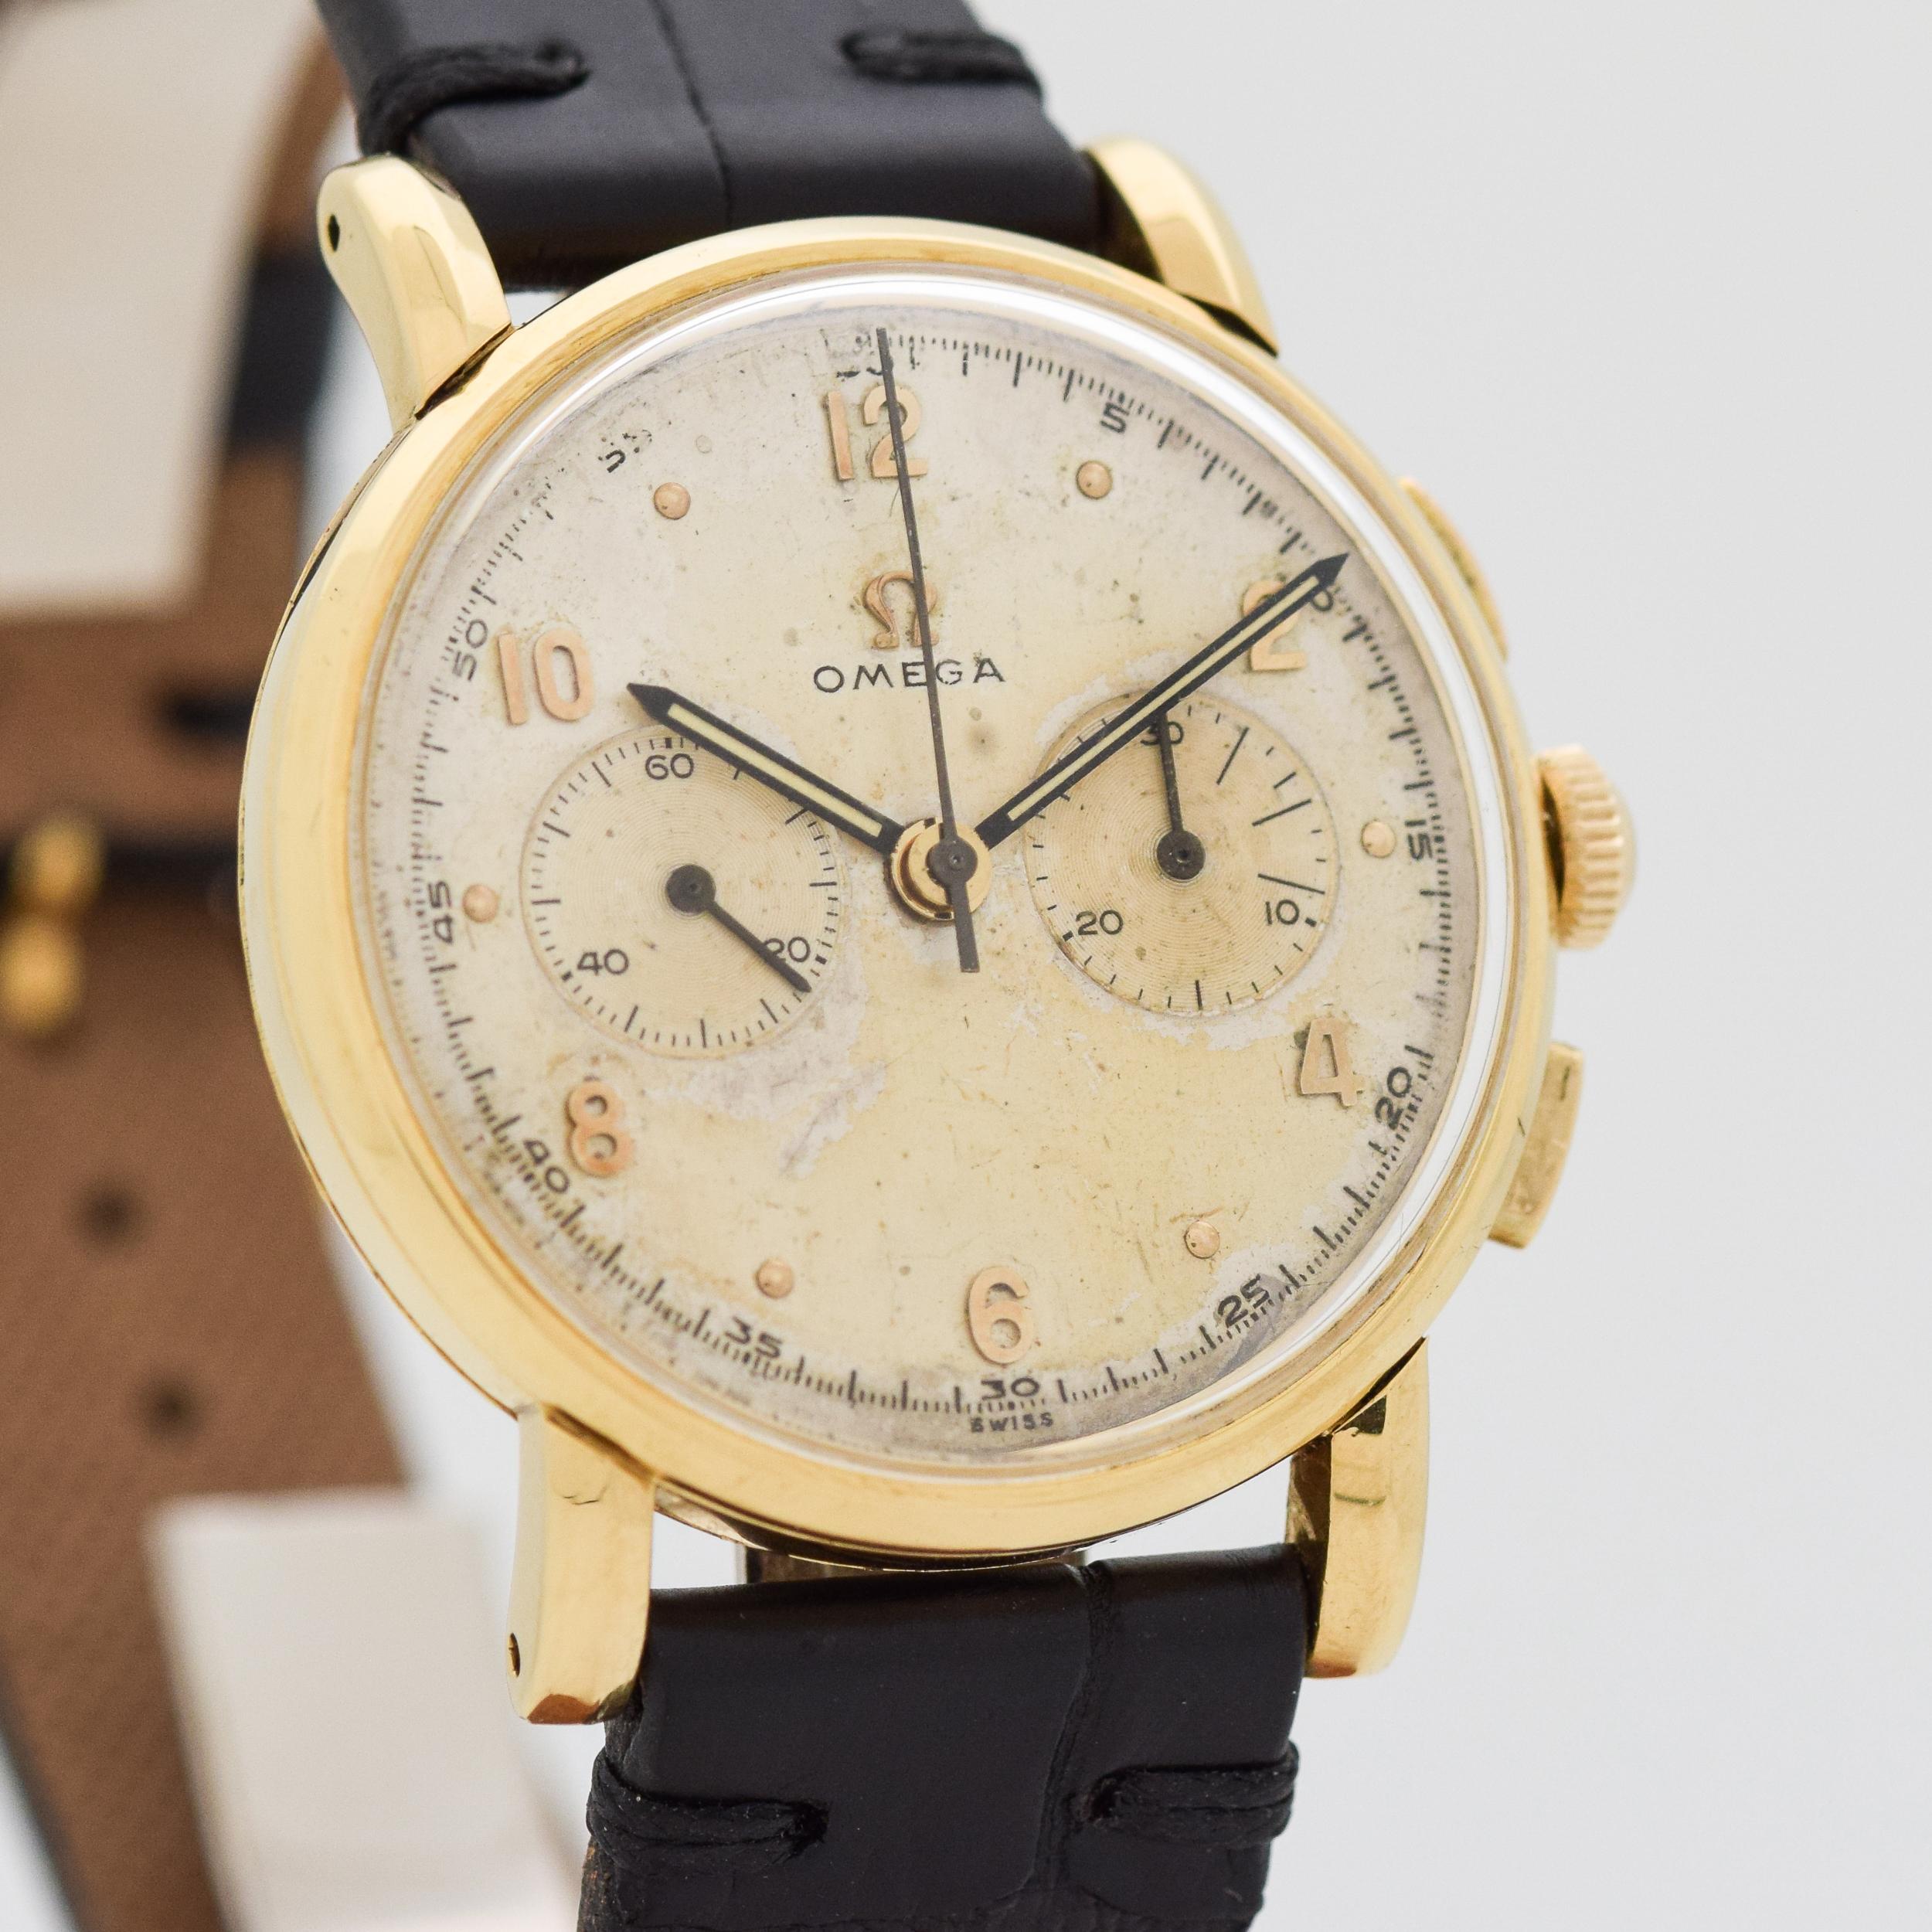 1945 Vintage Omega 2 Register Chronograph 18k Yellow Gold with Original Silver Dial with Applied Gold Arabic 2, 4, 6, 8, 10, and 12 and Dot Markers. 34mm x 40mm lug to lug (1.34 in. x 1.57 in.) - 17 jewel, manual caliber 320-T1-PC movement. Featured